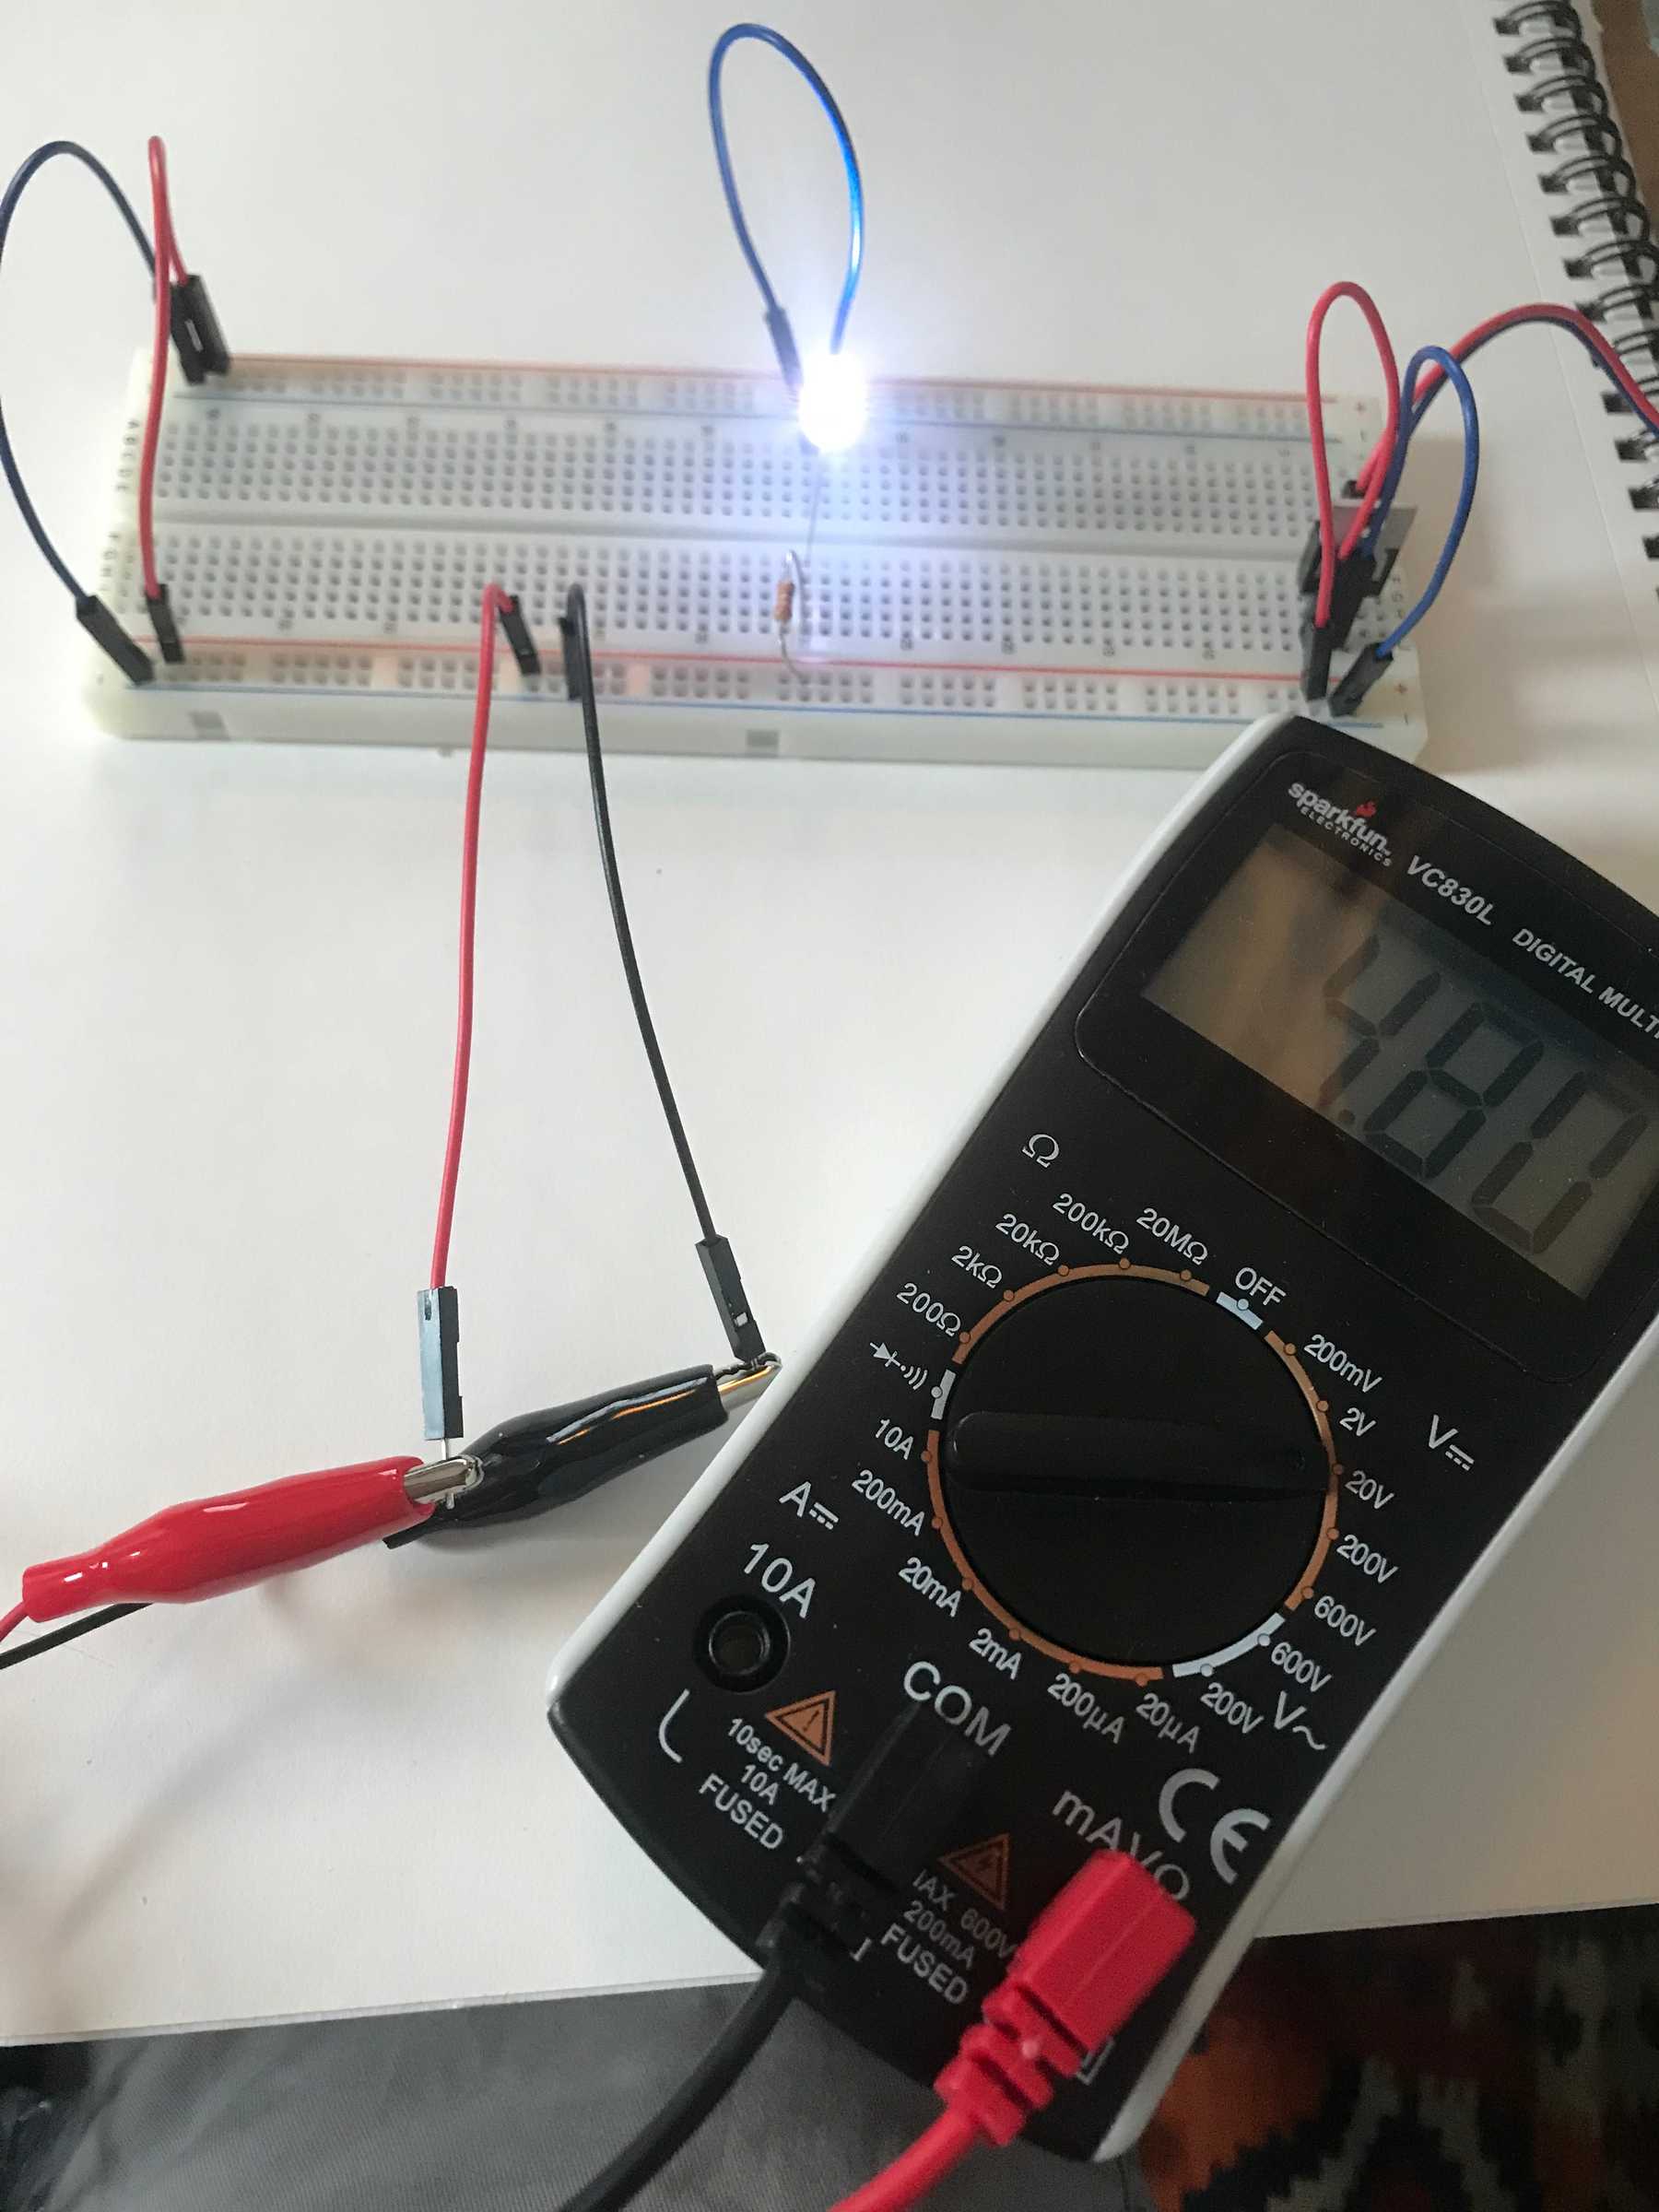 Measuring the voltage between power and ground